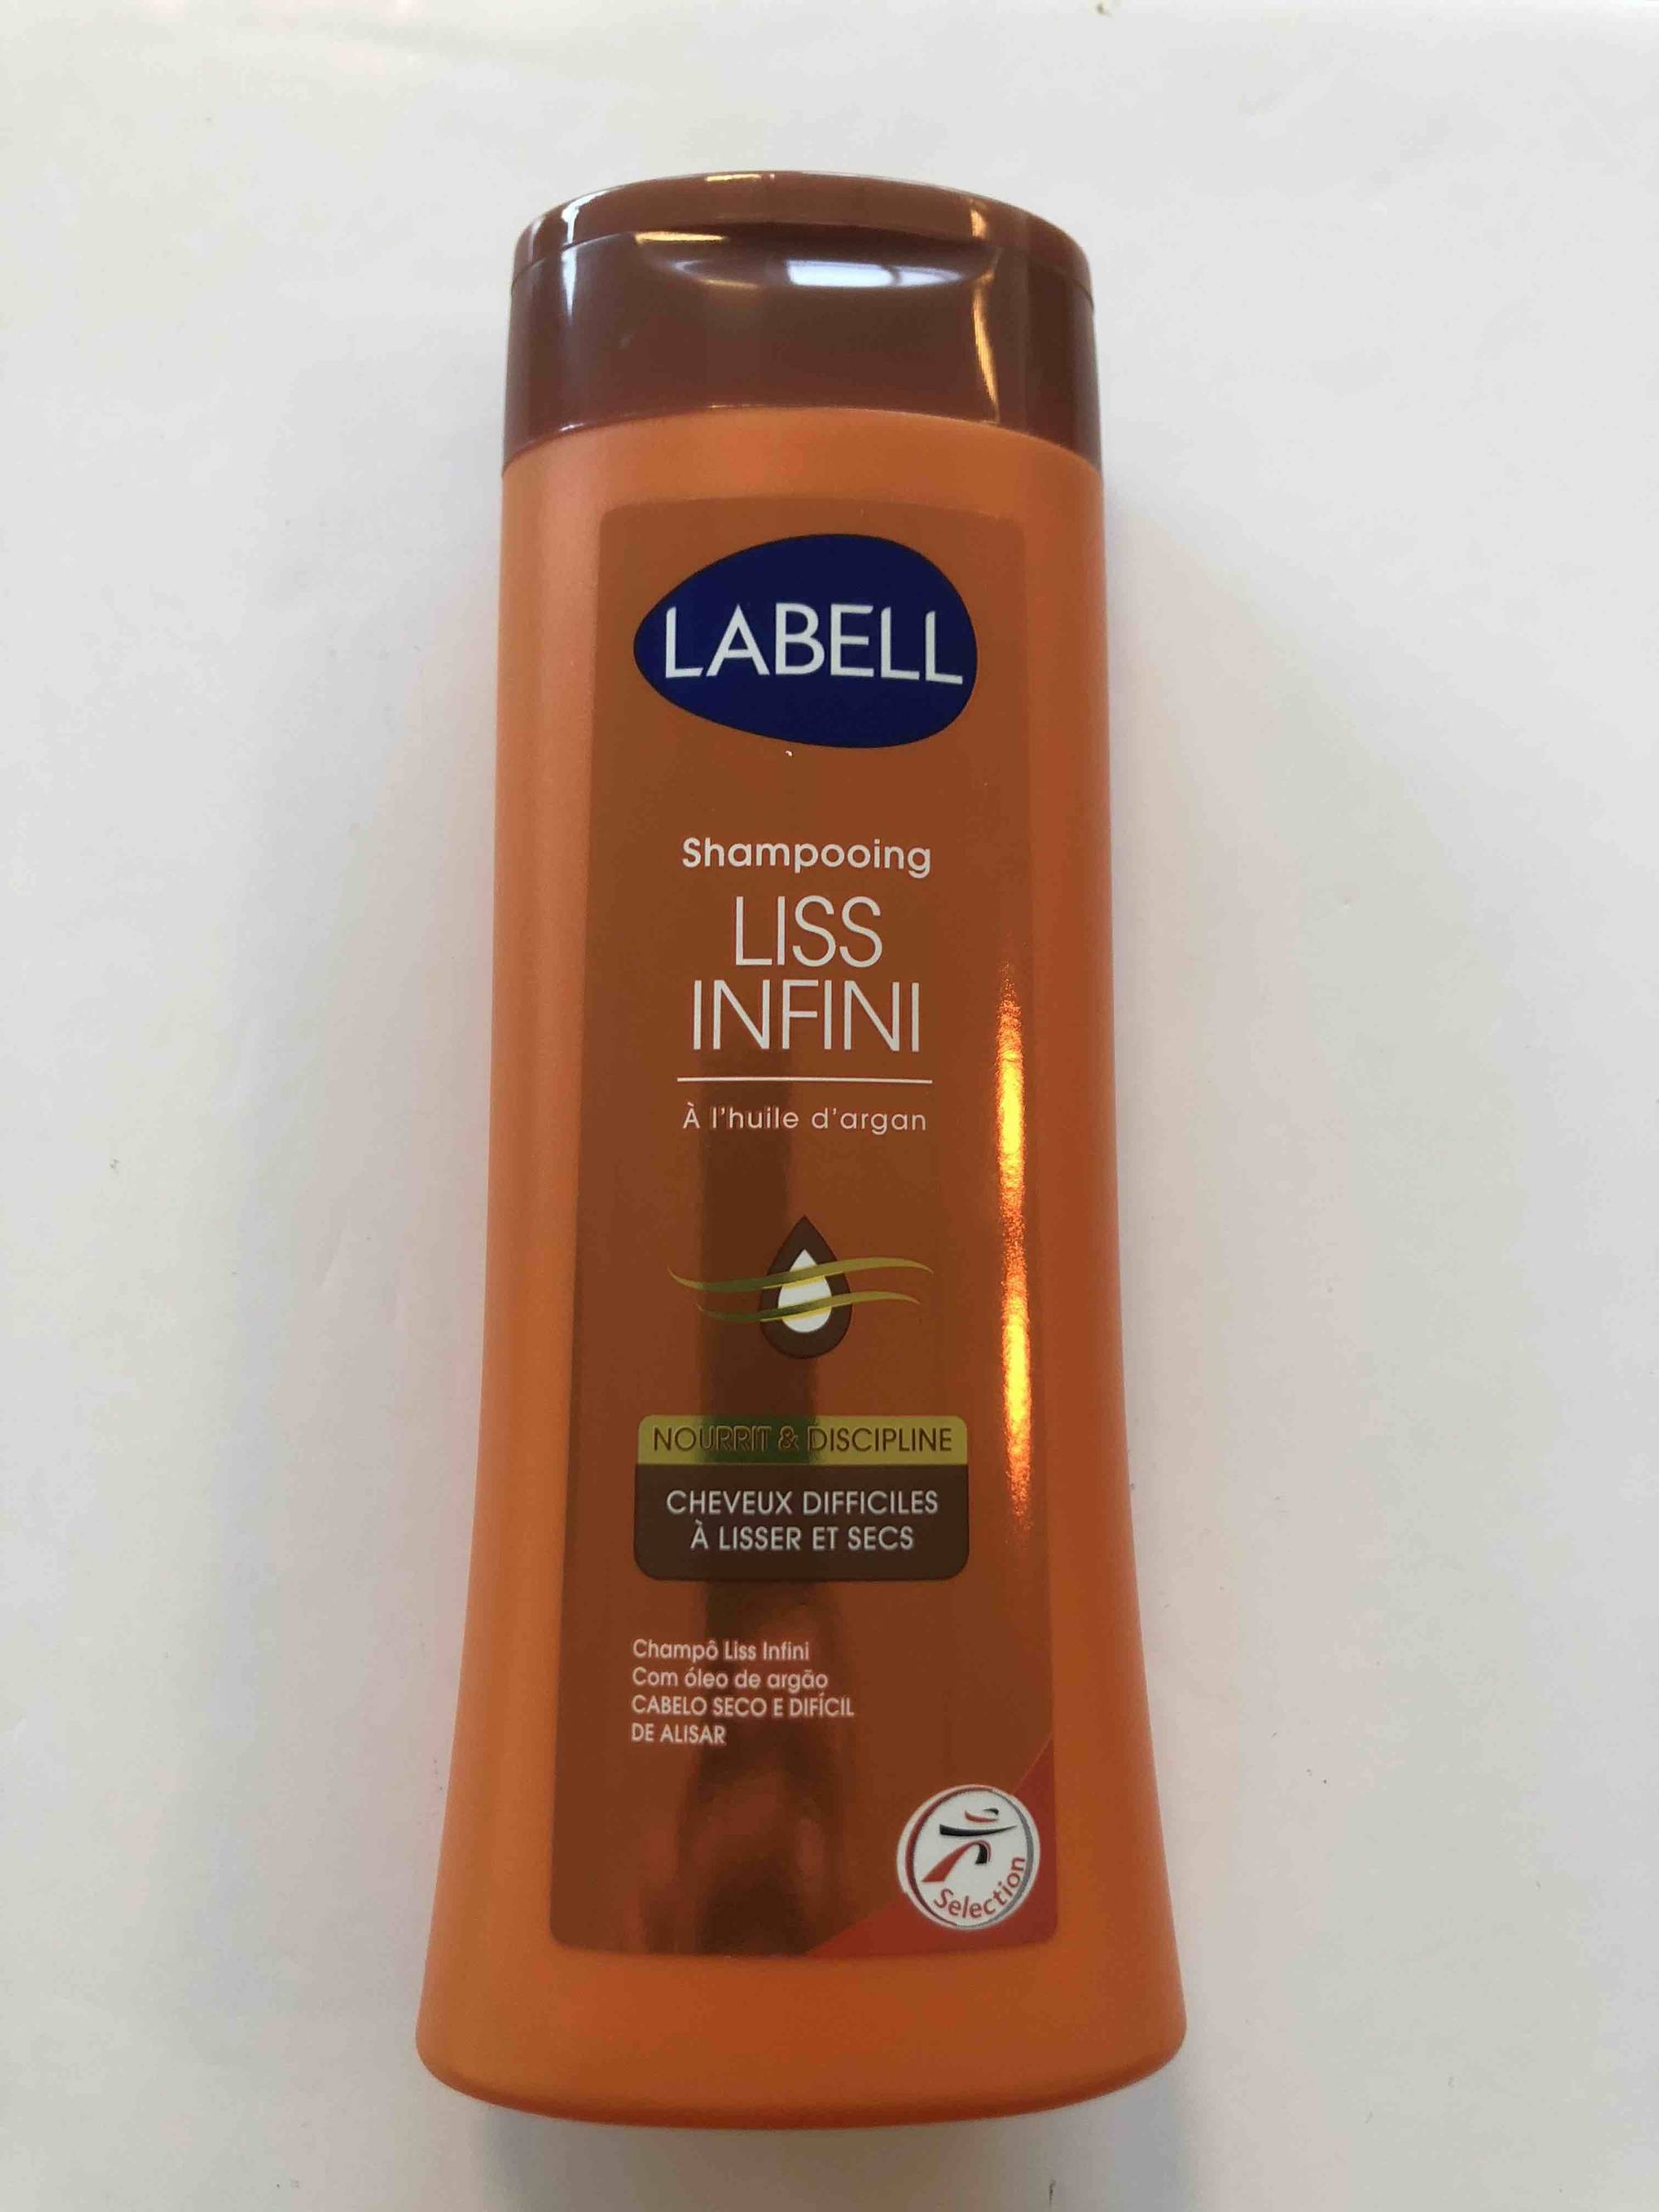 LABELL - Liss infini - Shampooing